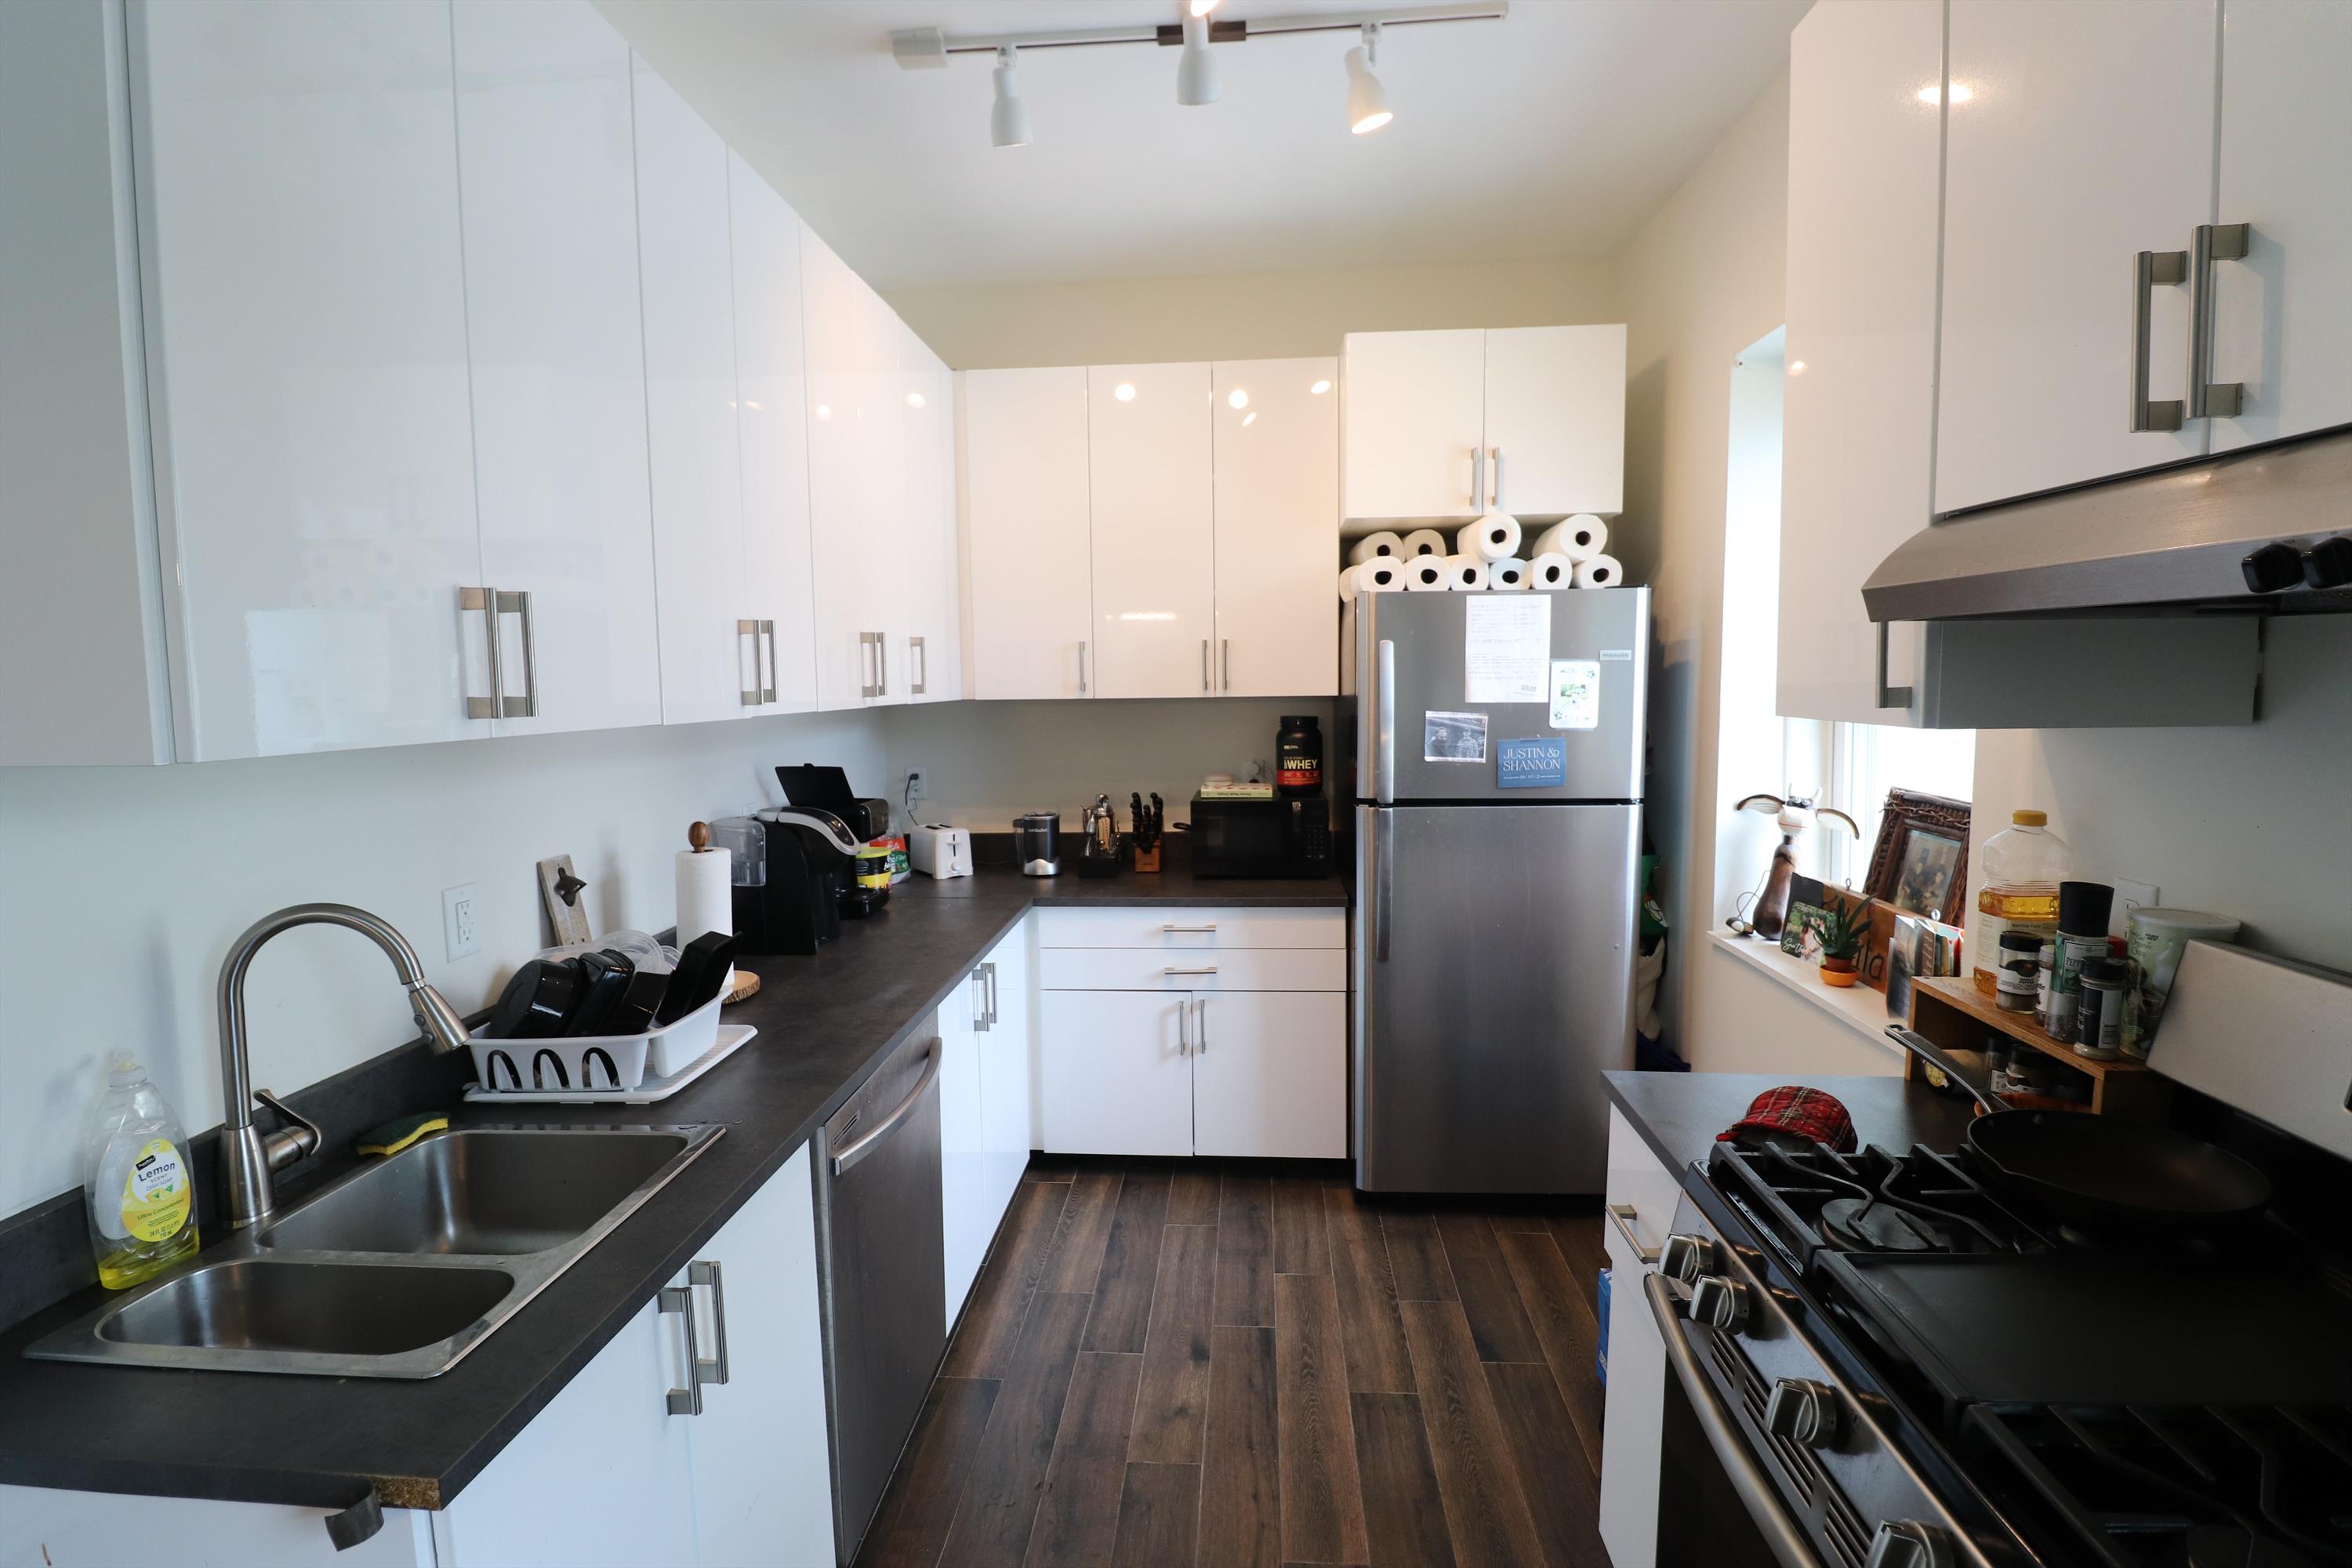 Amazing 3 bed, 1.5 bath apartment located in the heart of Hoboken! Kitchen was renovated 2 years ago with stainless steel appliances. Shared yard and free laundry on site! High ceilings and hardwood floors throughout. (Landlord is open to paying the fee for a higher monthly payment.)